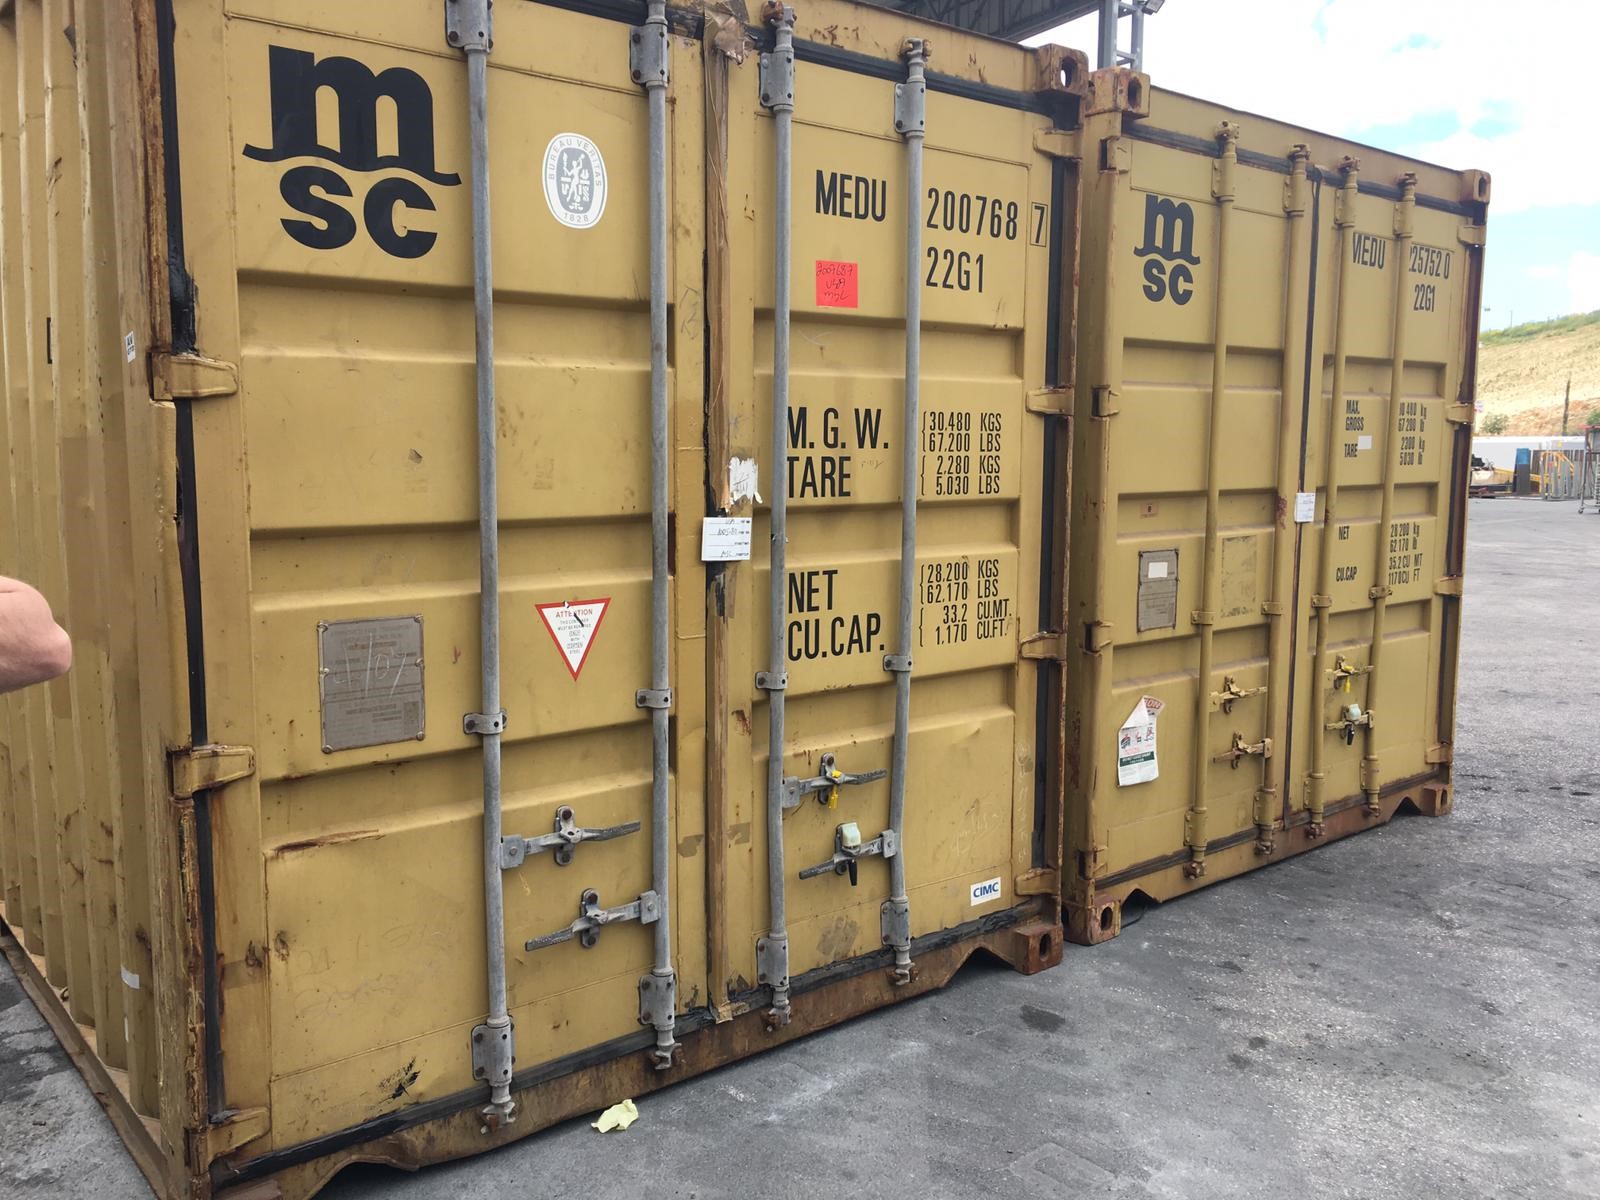 Two tan shipping containers are locked side-by-side on the concrete ground.